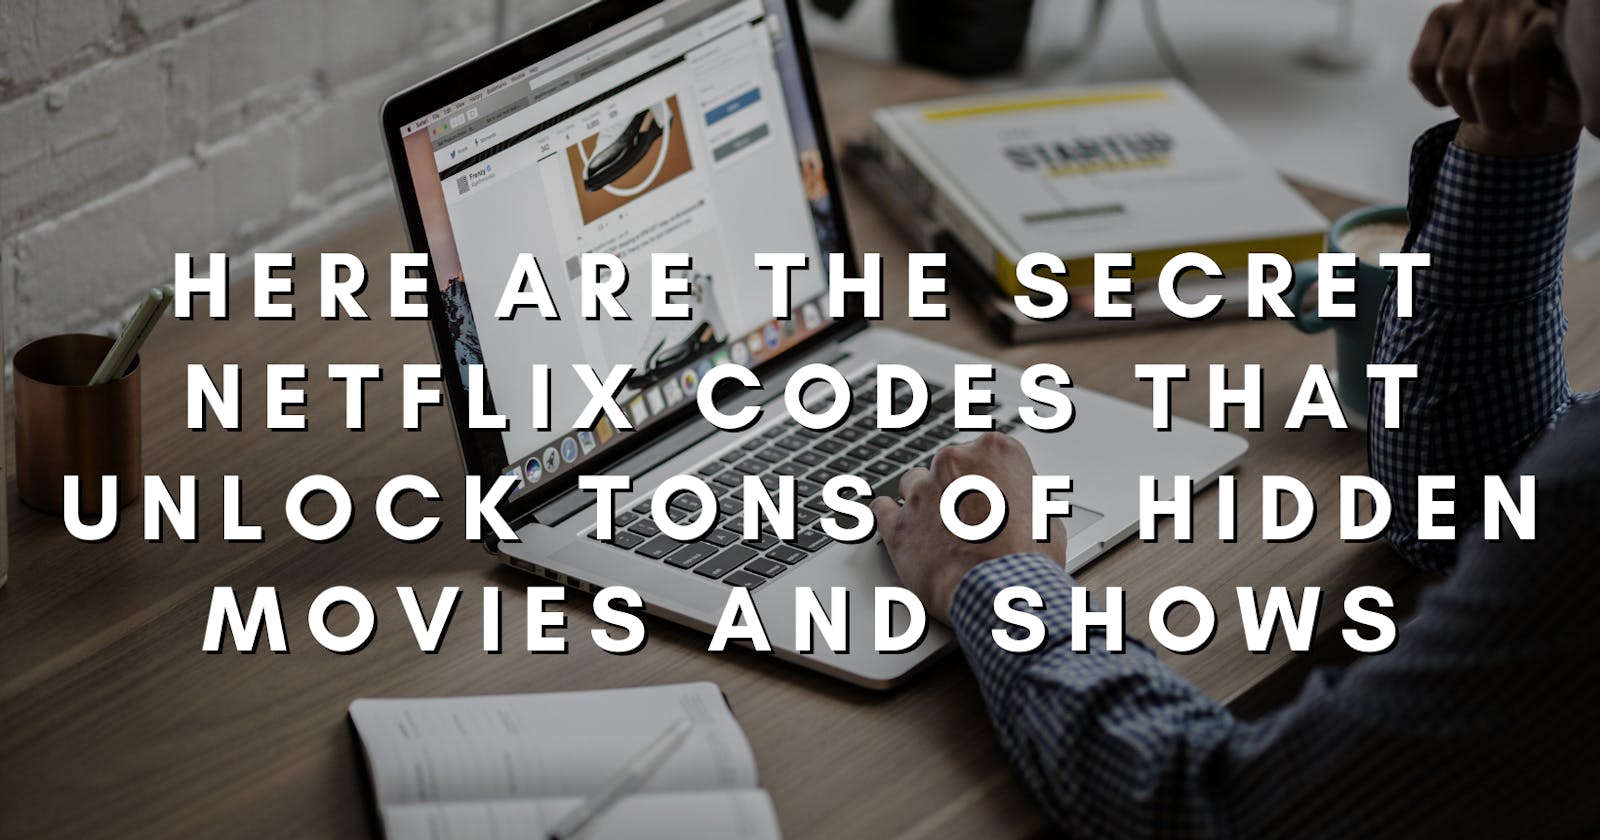 Here are the secret Netflix codes that unlock tons of hidden movies and shows